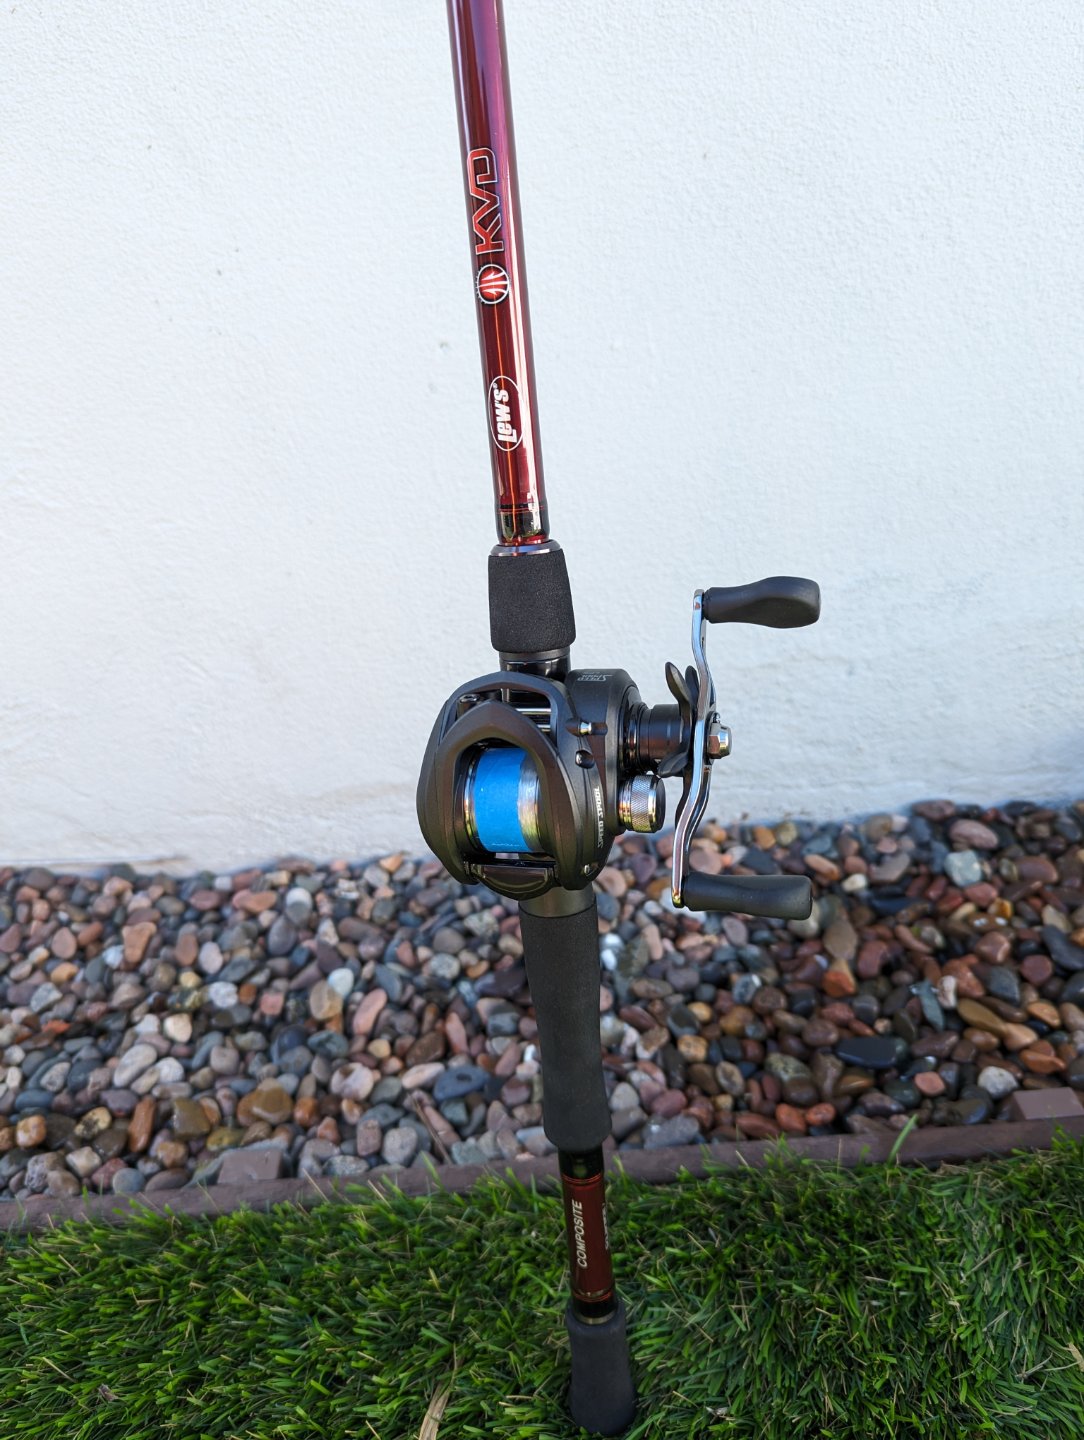 FS - rods & combos galore - bass, bay, inshore, trout - San Diego